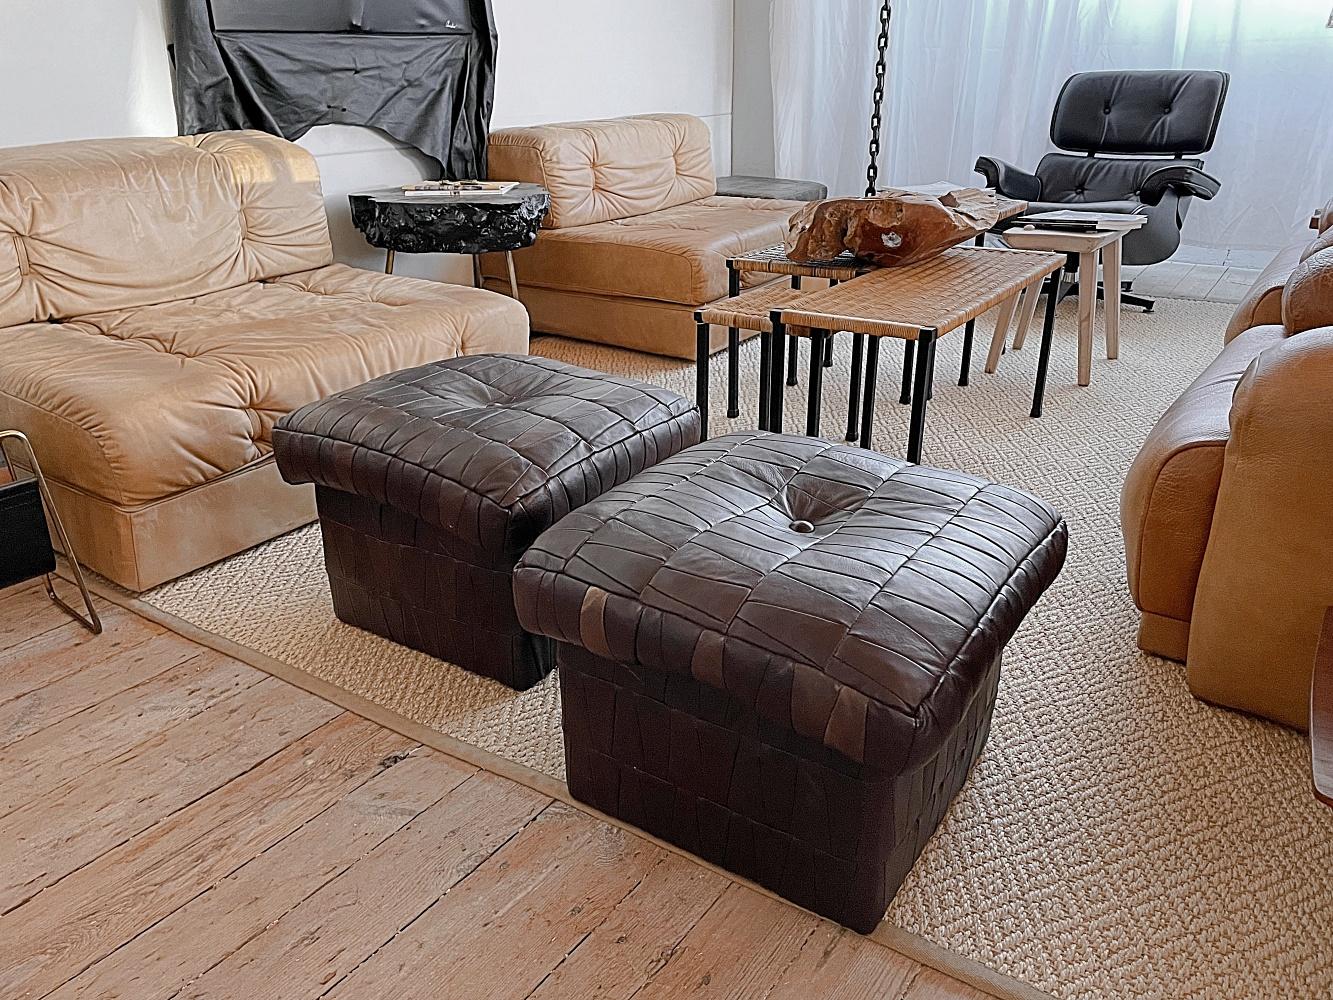 Unique and decorative handmade De Sede storage pouf in cocoa brown made of high quality soft DeSede leather. The pouf is in very good condition with lovely patina, high seating comfort.
 